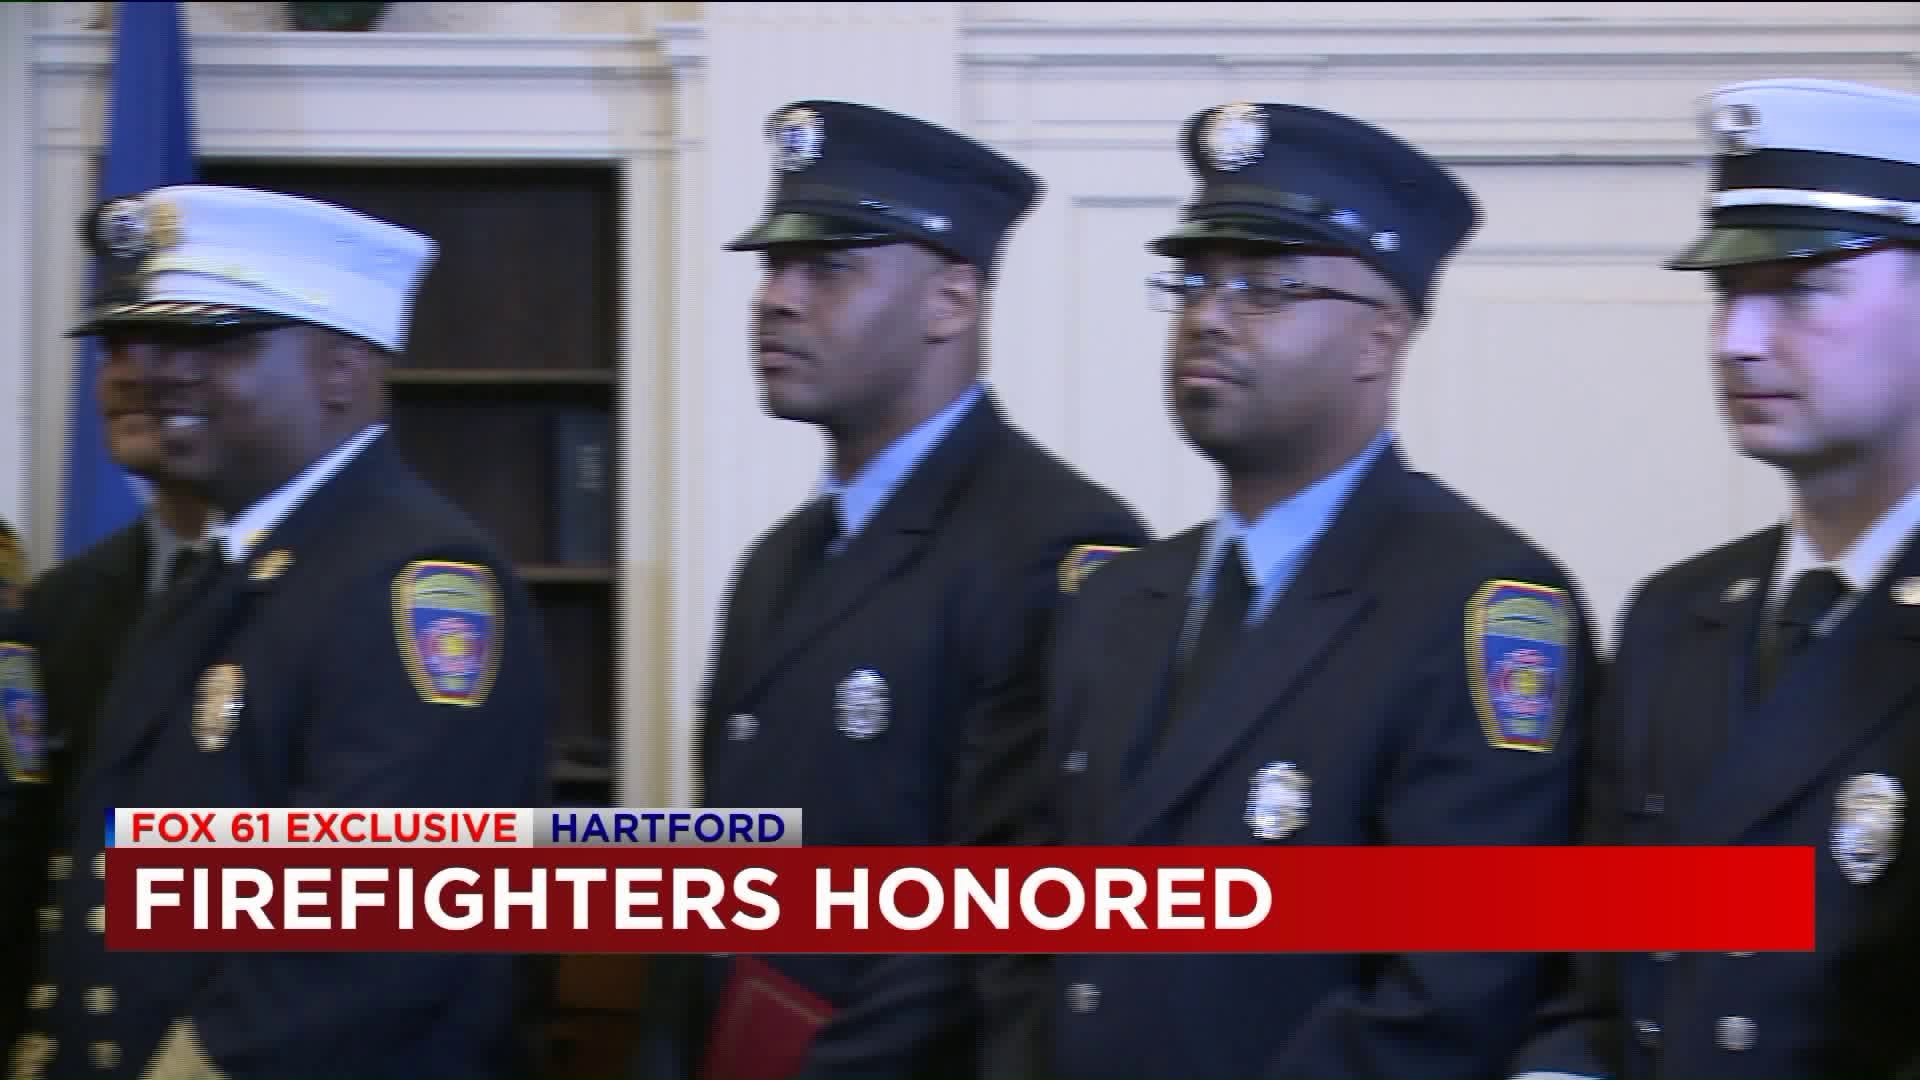 Hartford firefighters honored